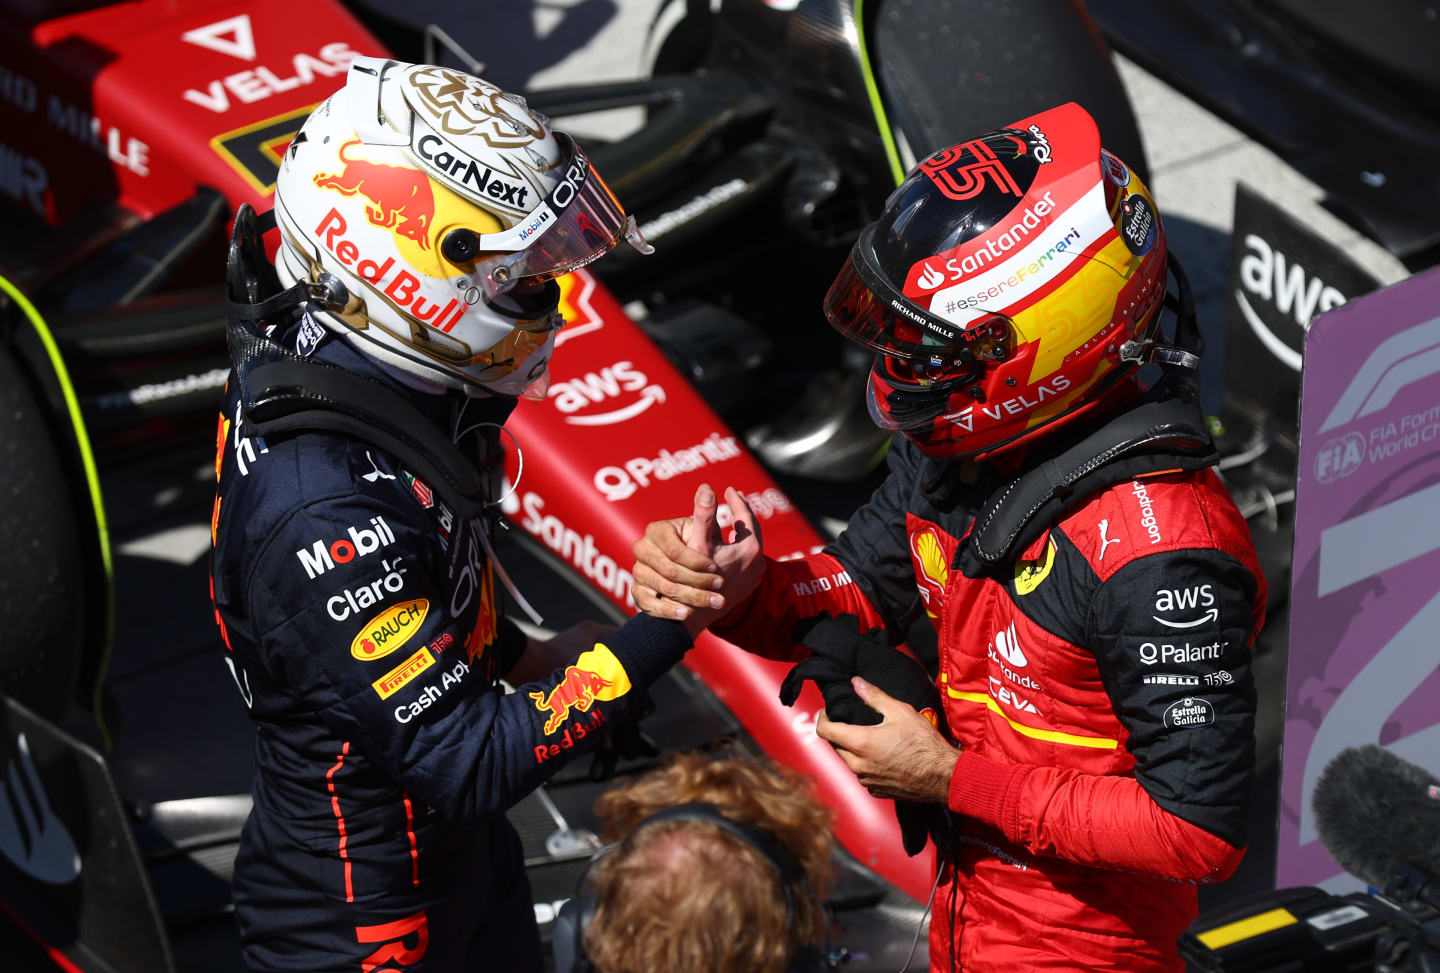 MONTREAL, QUEBEC - JUNE 19: Race winner Max Verstappen of the Netherlands and Oracle Red Bull Racing talks with Second placed Carlos Sainz of Spain and Ferrari in parc ferme during the F1 Grand Prix of Canada at Circuit Gilles Villeneuve on June 19, 2022 in Montreal, Quebec. (Photo by Clive Rose/Getty Images)